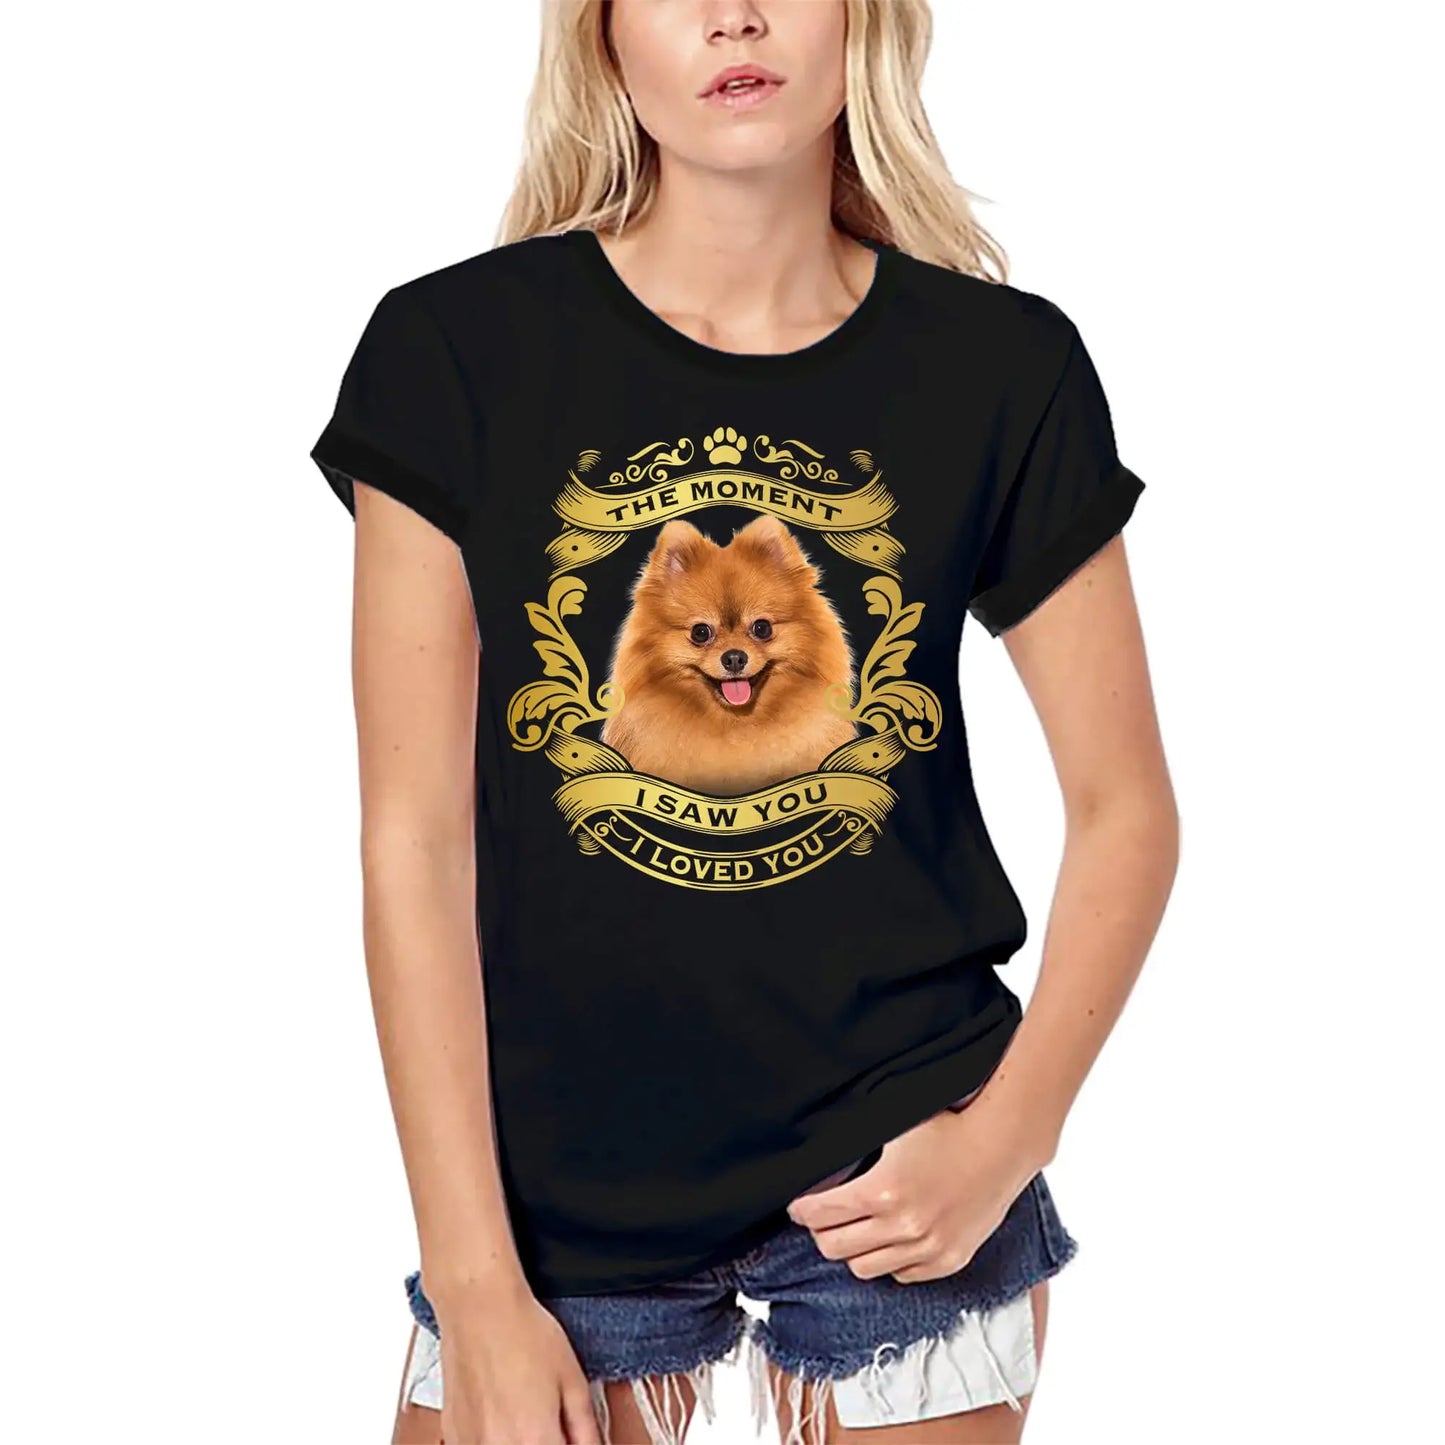 Women's Graphic T-Shirt Organic The Moment I Saw You I Loved You - Pomeranian Dog Lover Eco-Friendly Ladies Limited Edition Short Sleeve Tee-Shirt Vintage Birthday Gift Novelty